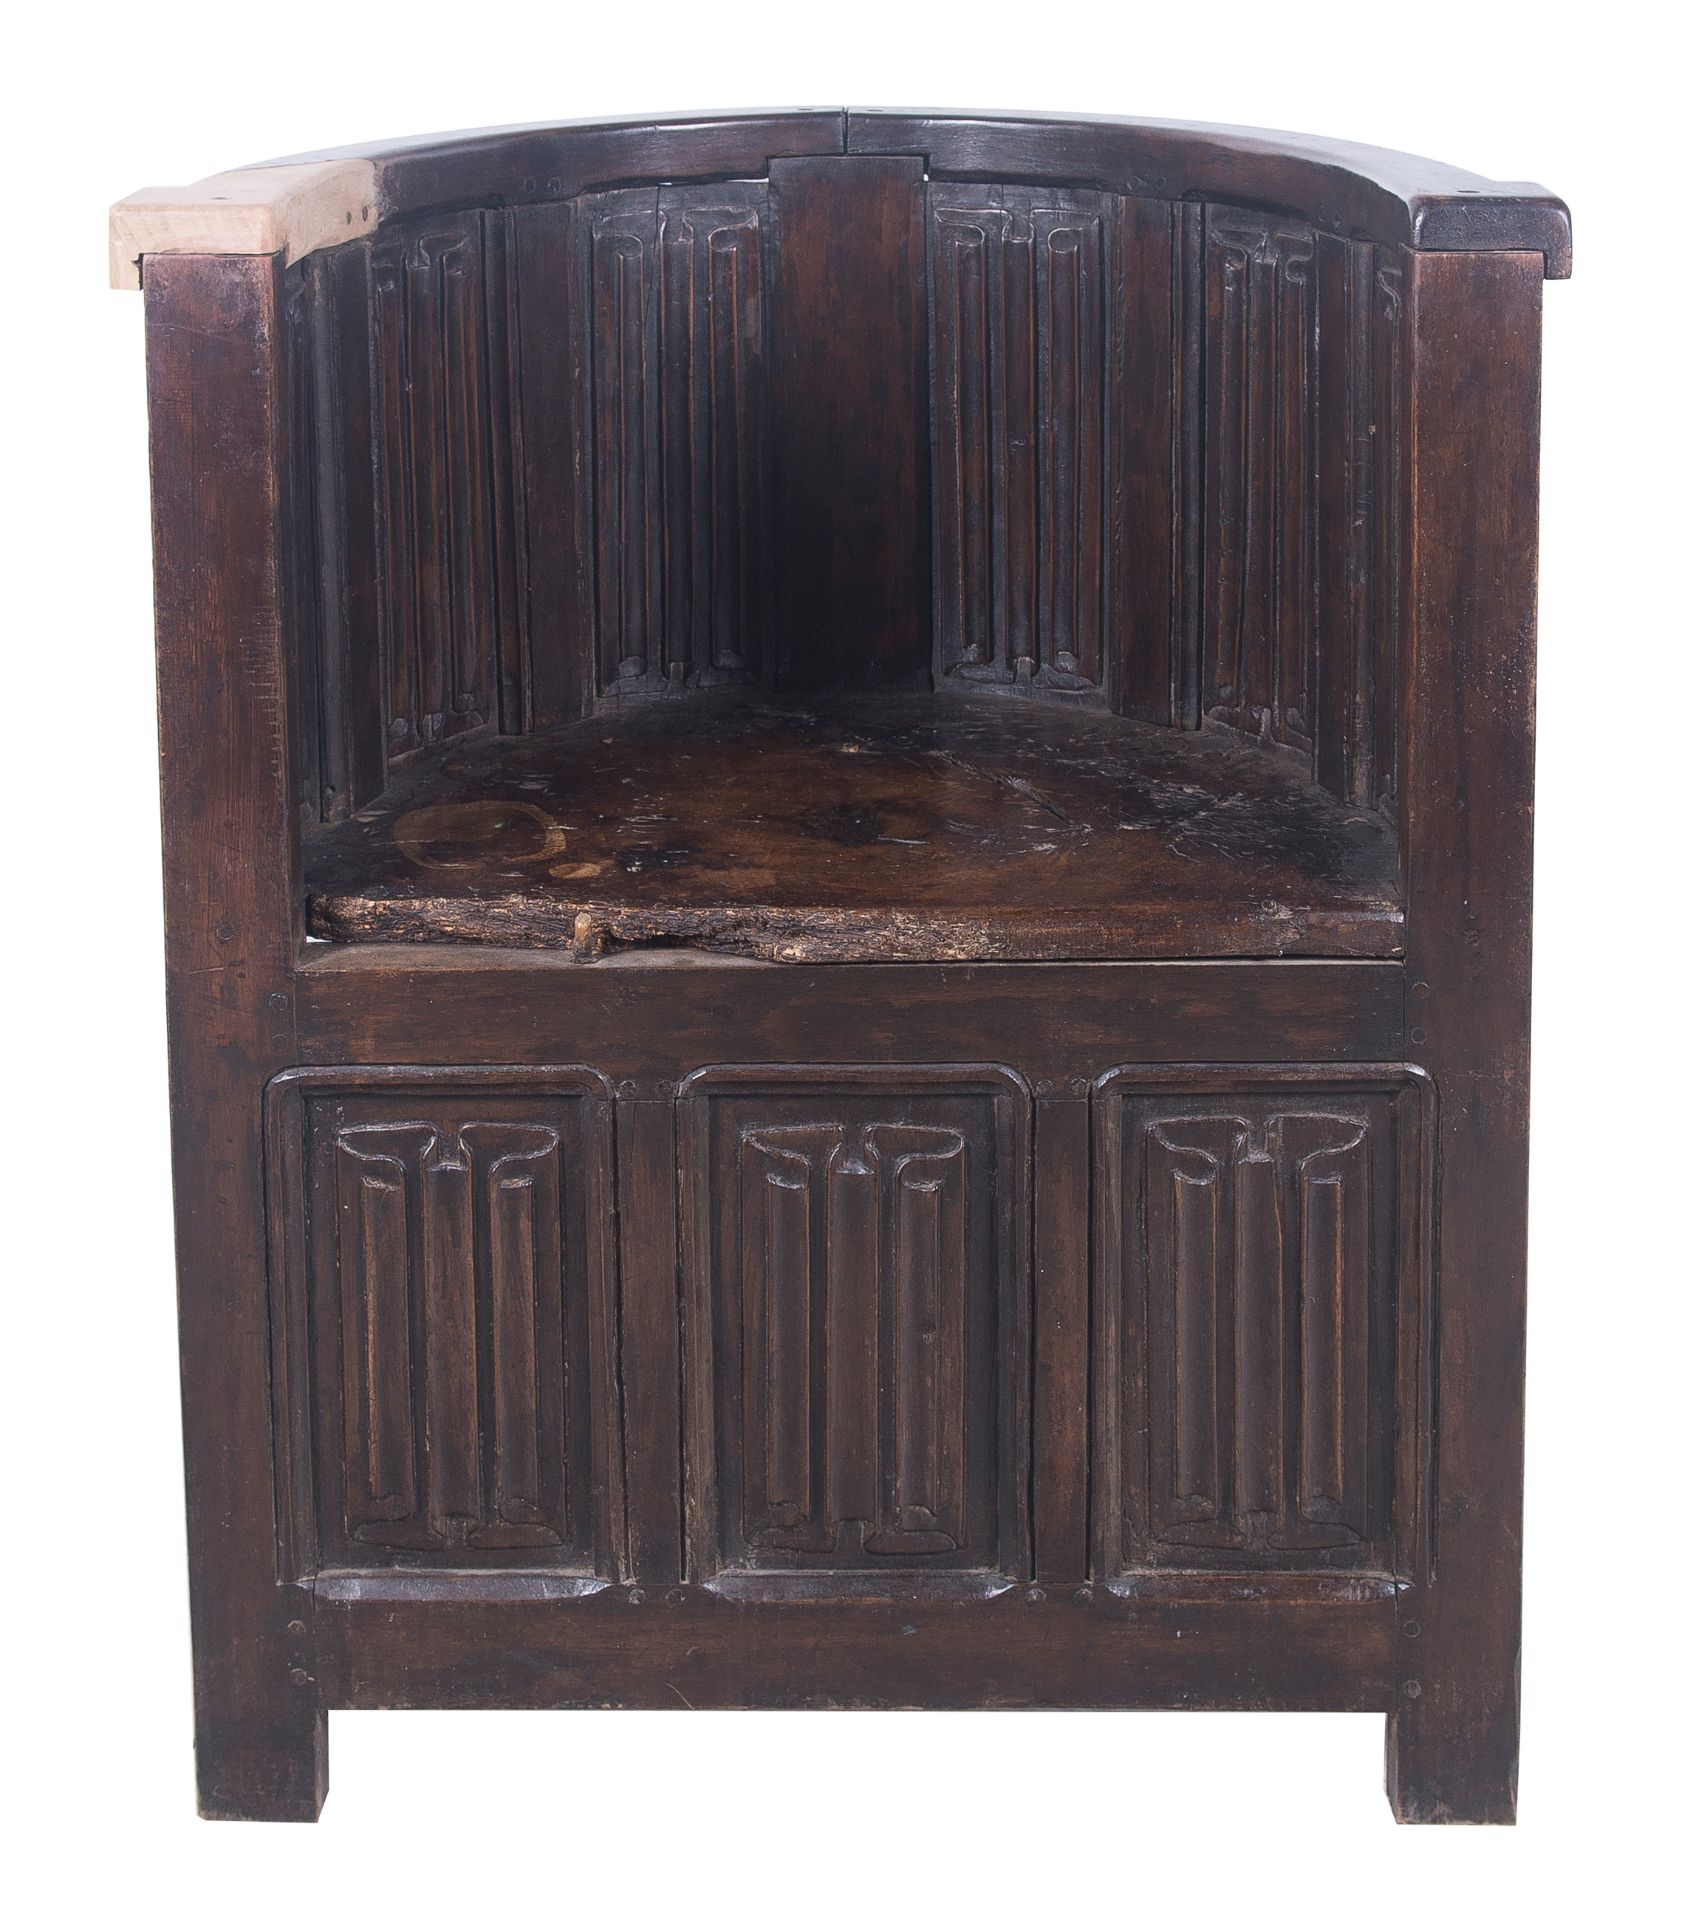 Bishop's chair. Carved wood. Gothic. 15th century.